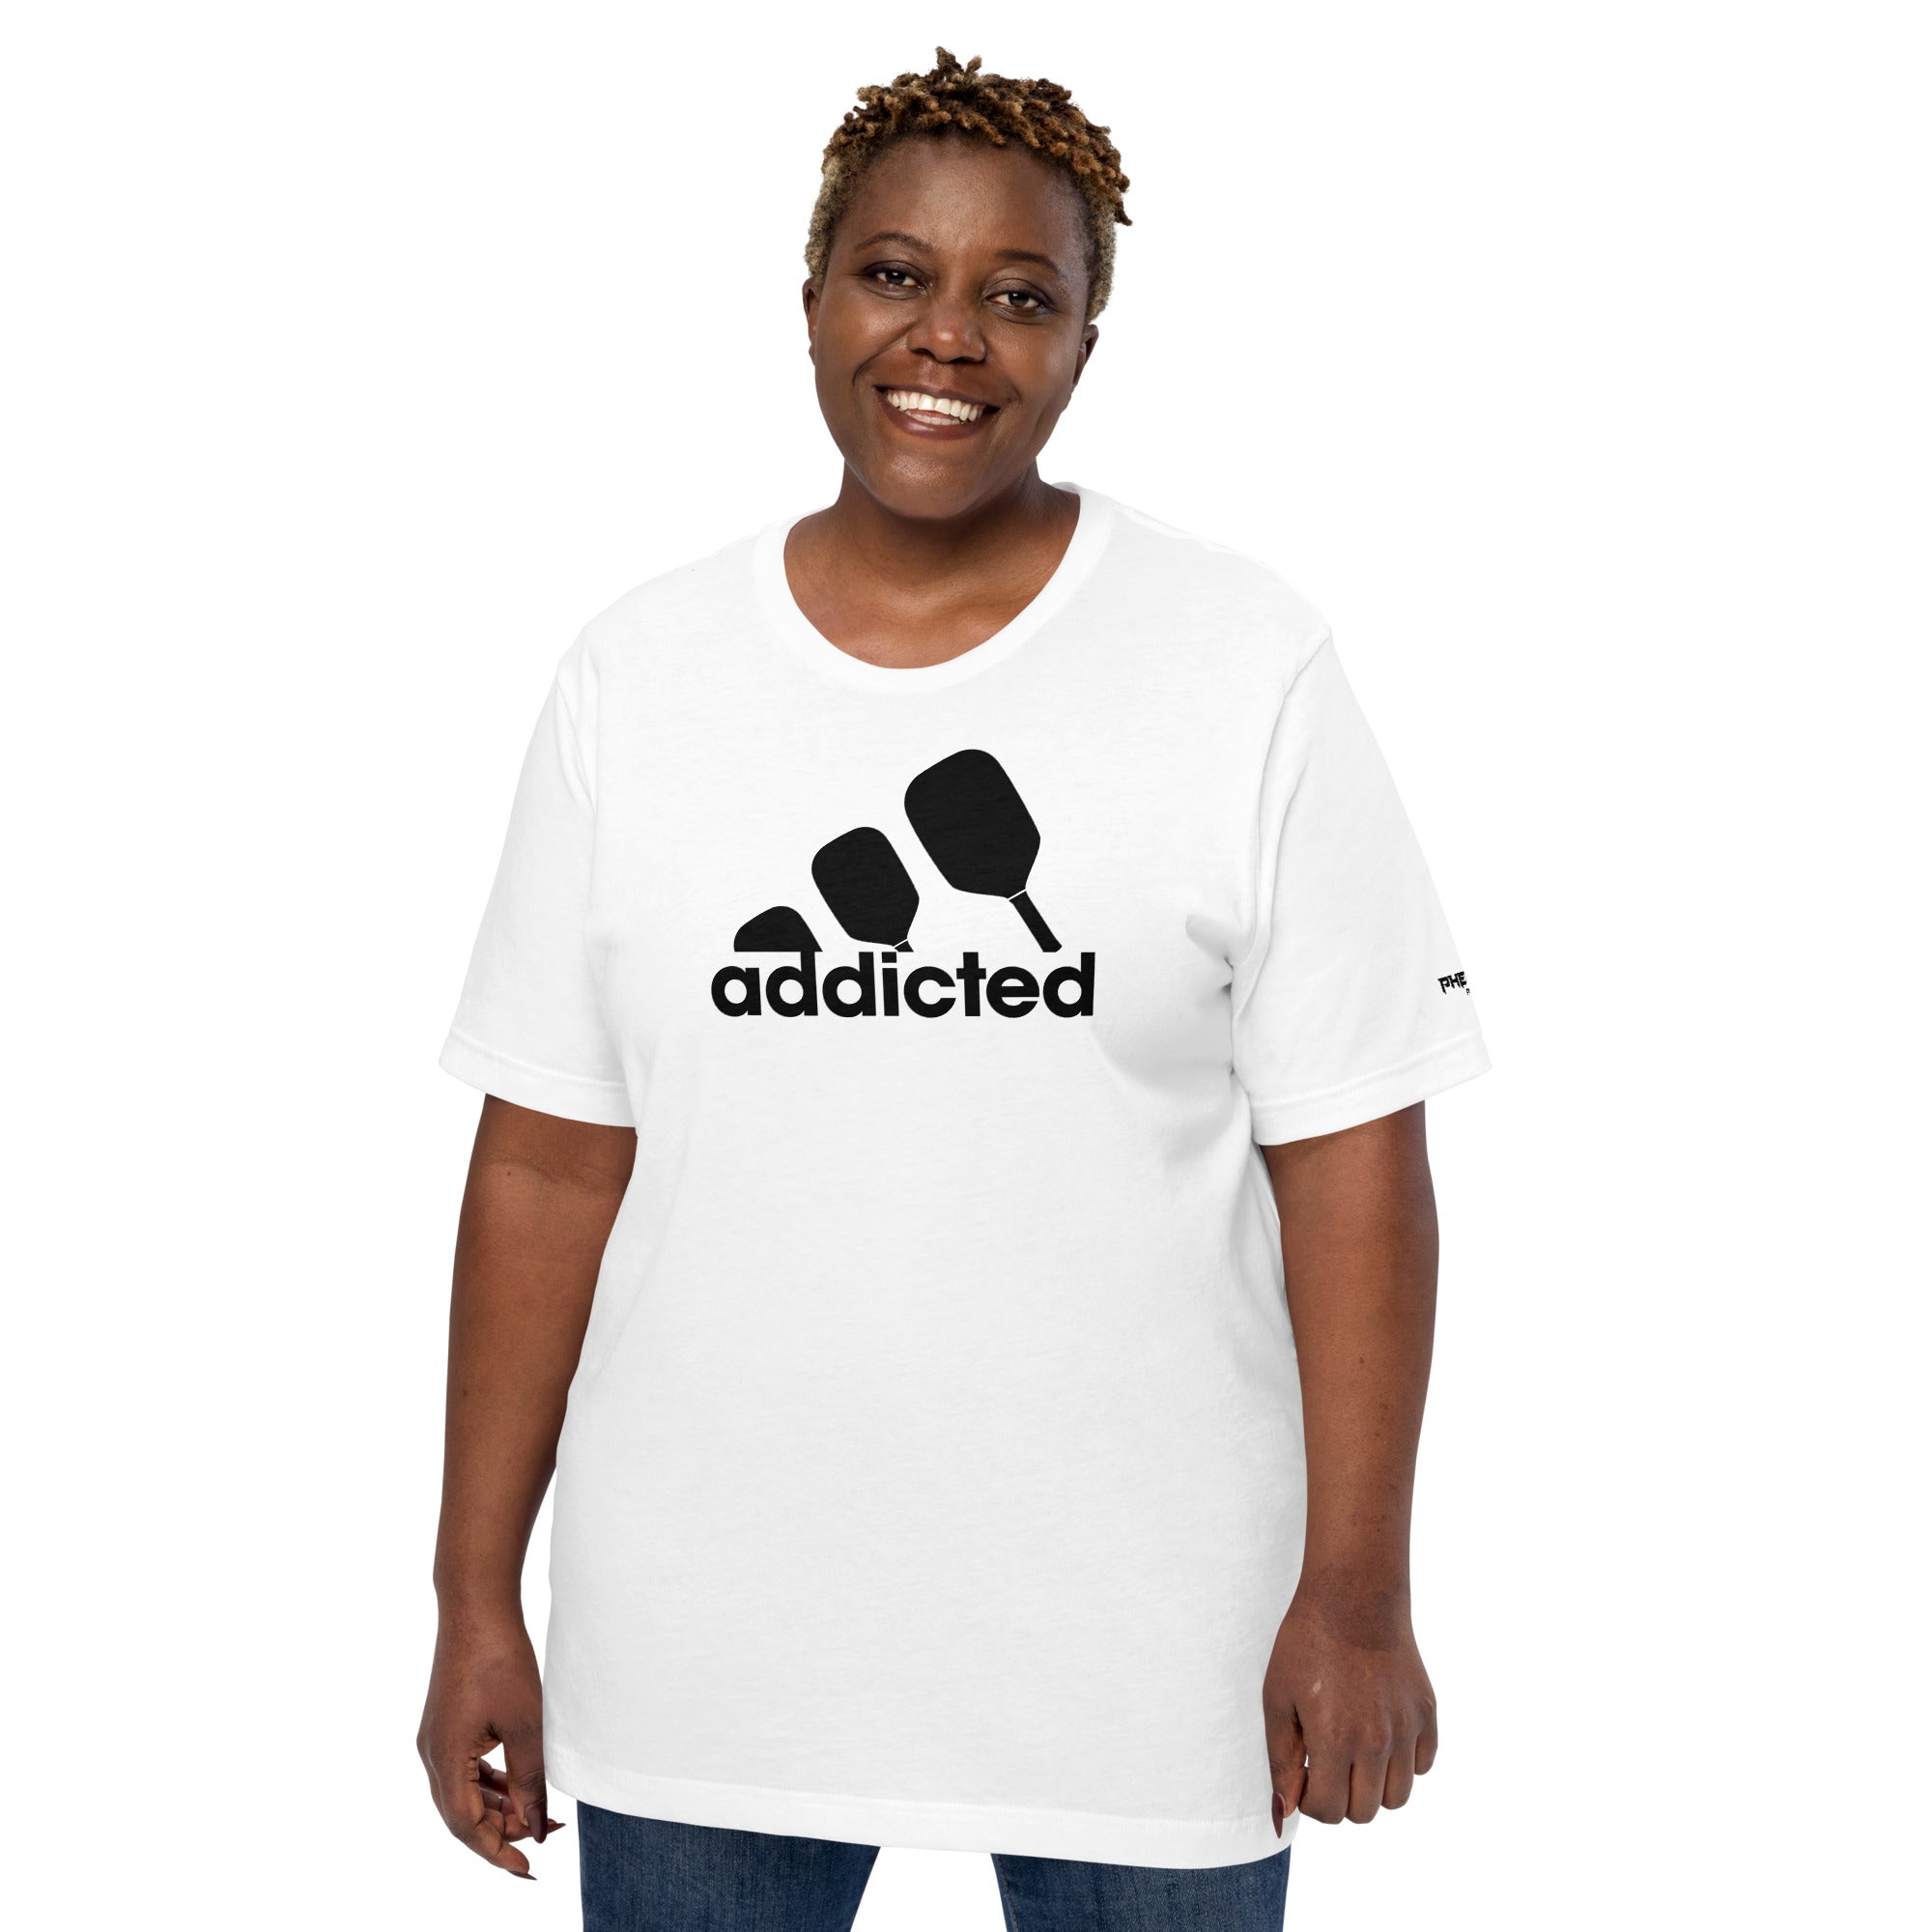 plus sized woman wearing a white addicted pickleball shirt